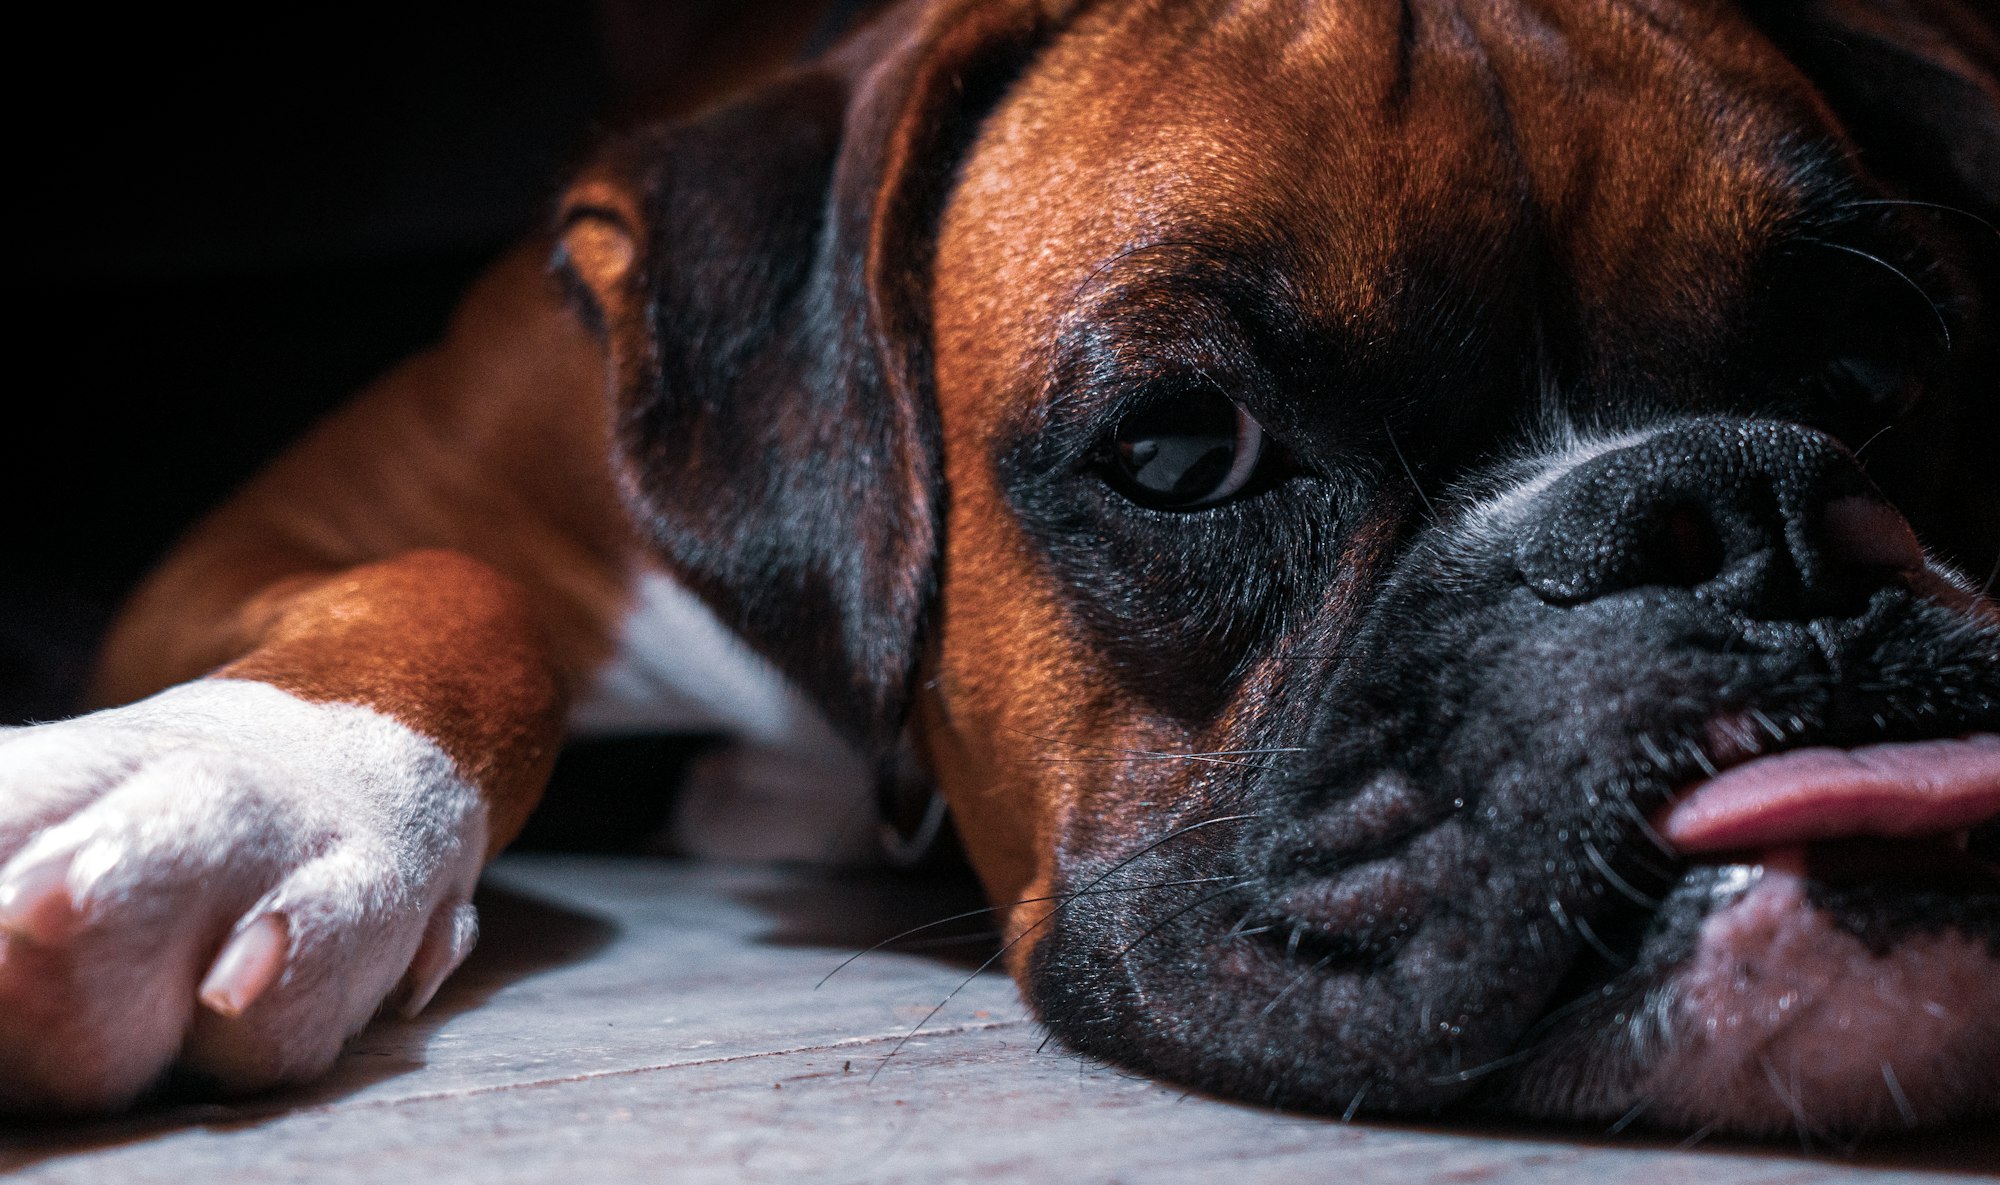 What Were Boxer Dogs Bred For?